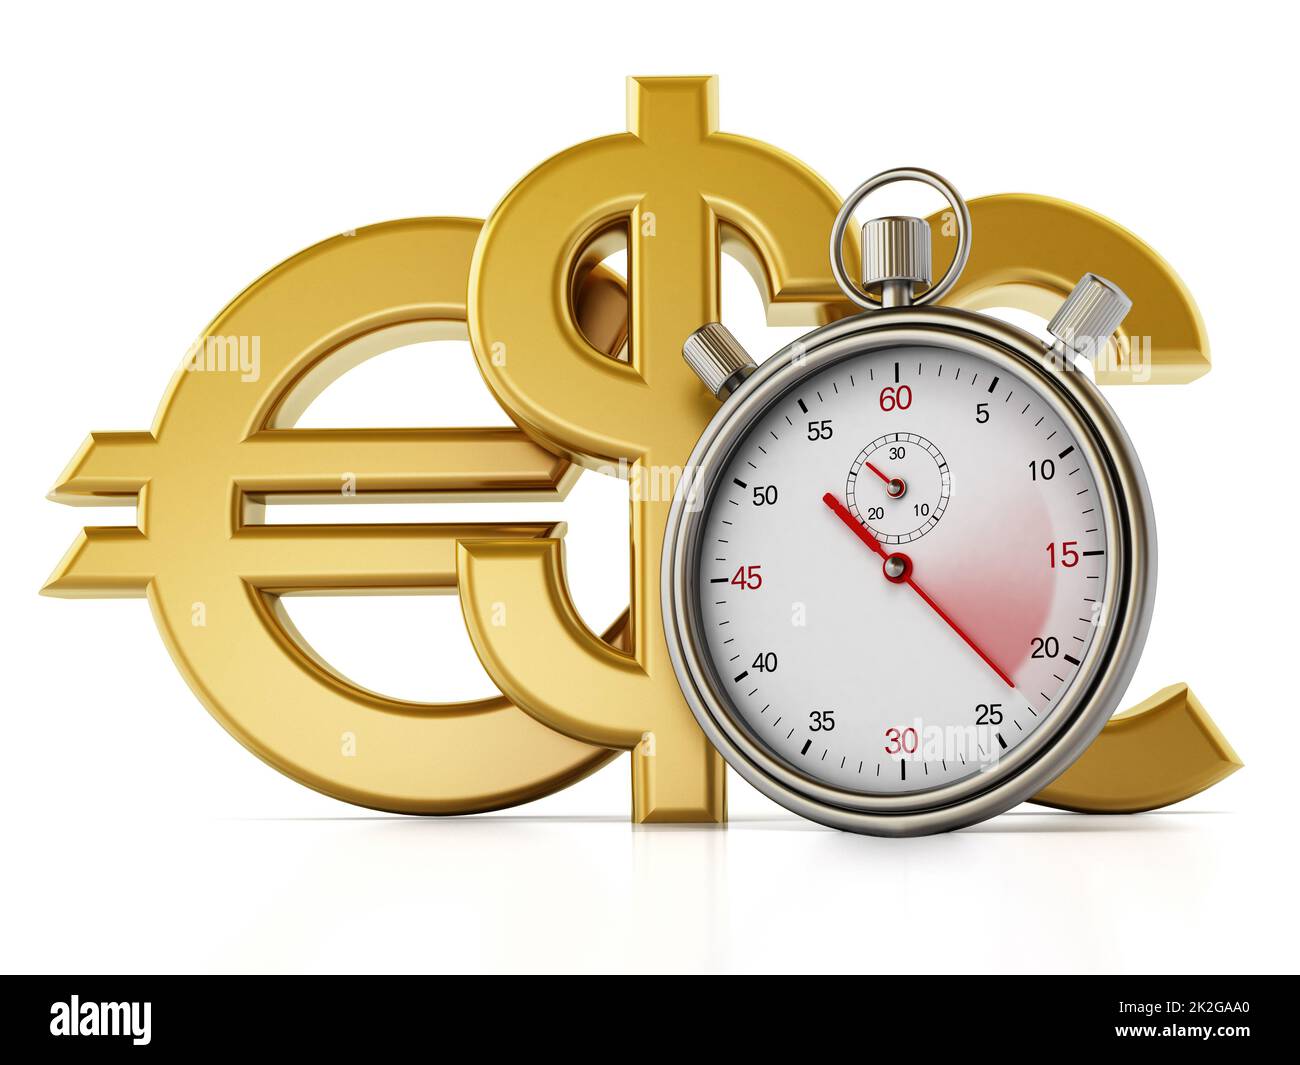 Chronometer and currency symbols Stock Photo